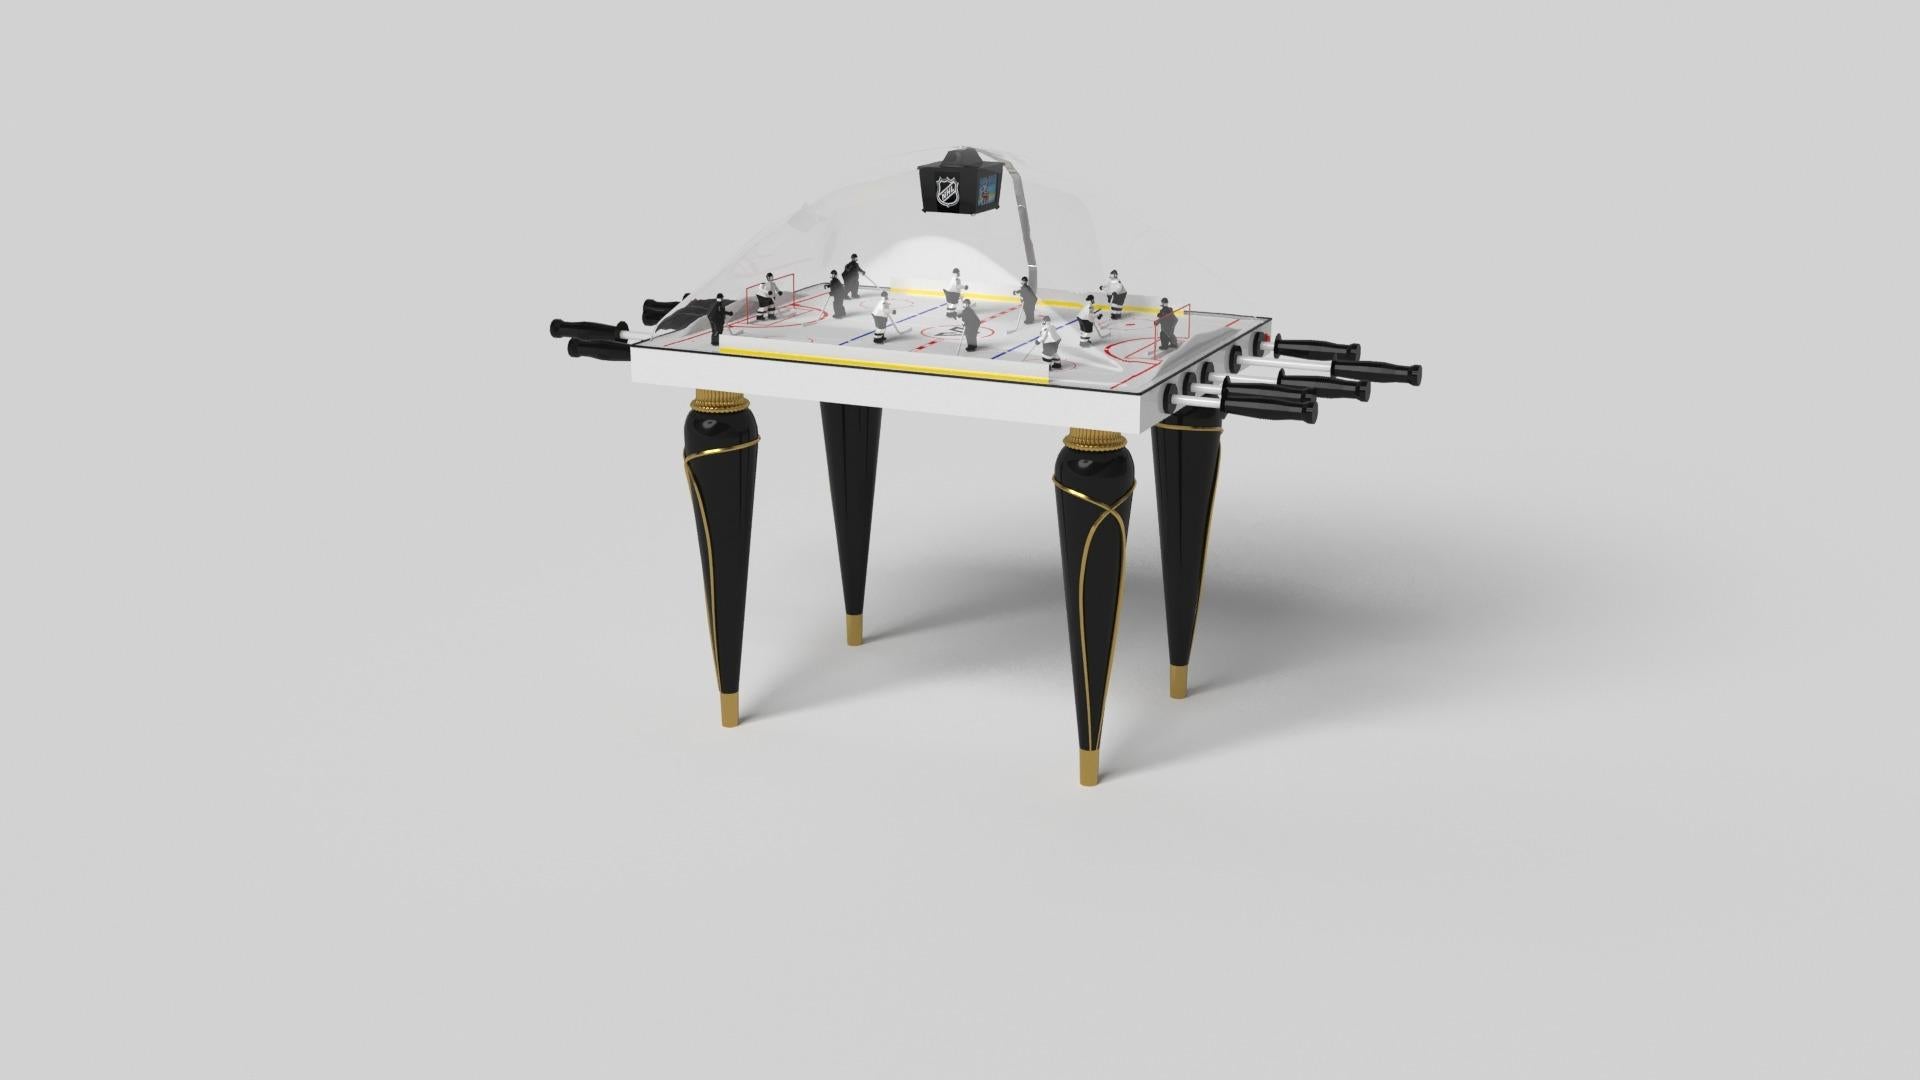 Champagne gold accents add undeniable elegance to this luxury dome hockey table. Offering superior playability and uncompromised style, this design features hand carved details, decorative metal elements, and metal sabots at the bottom of each leg.